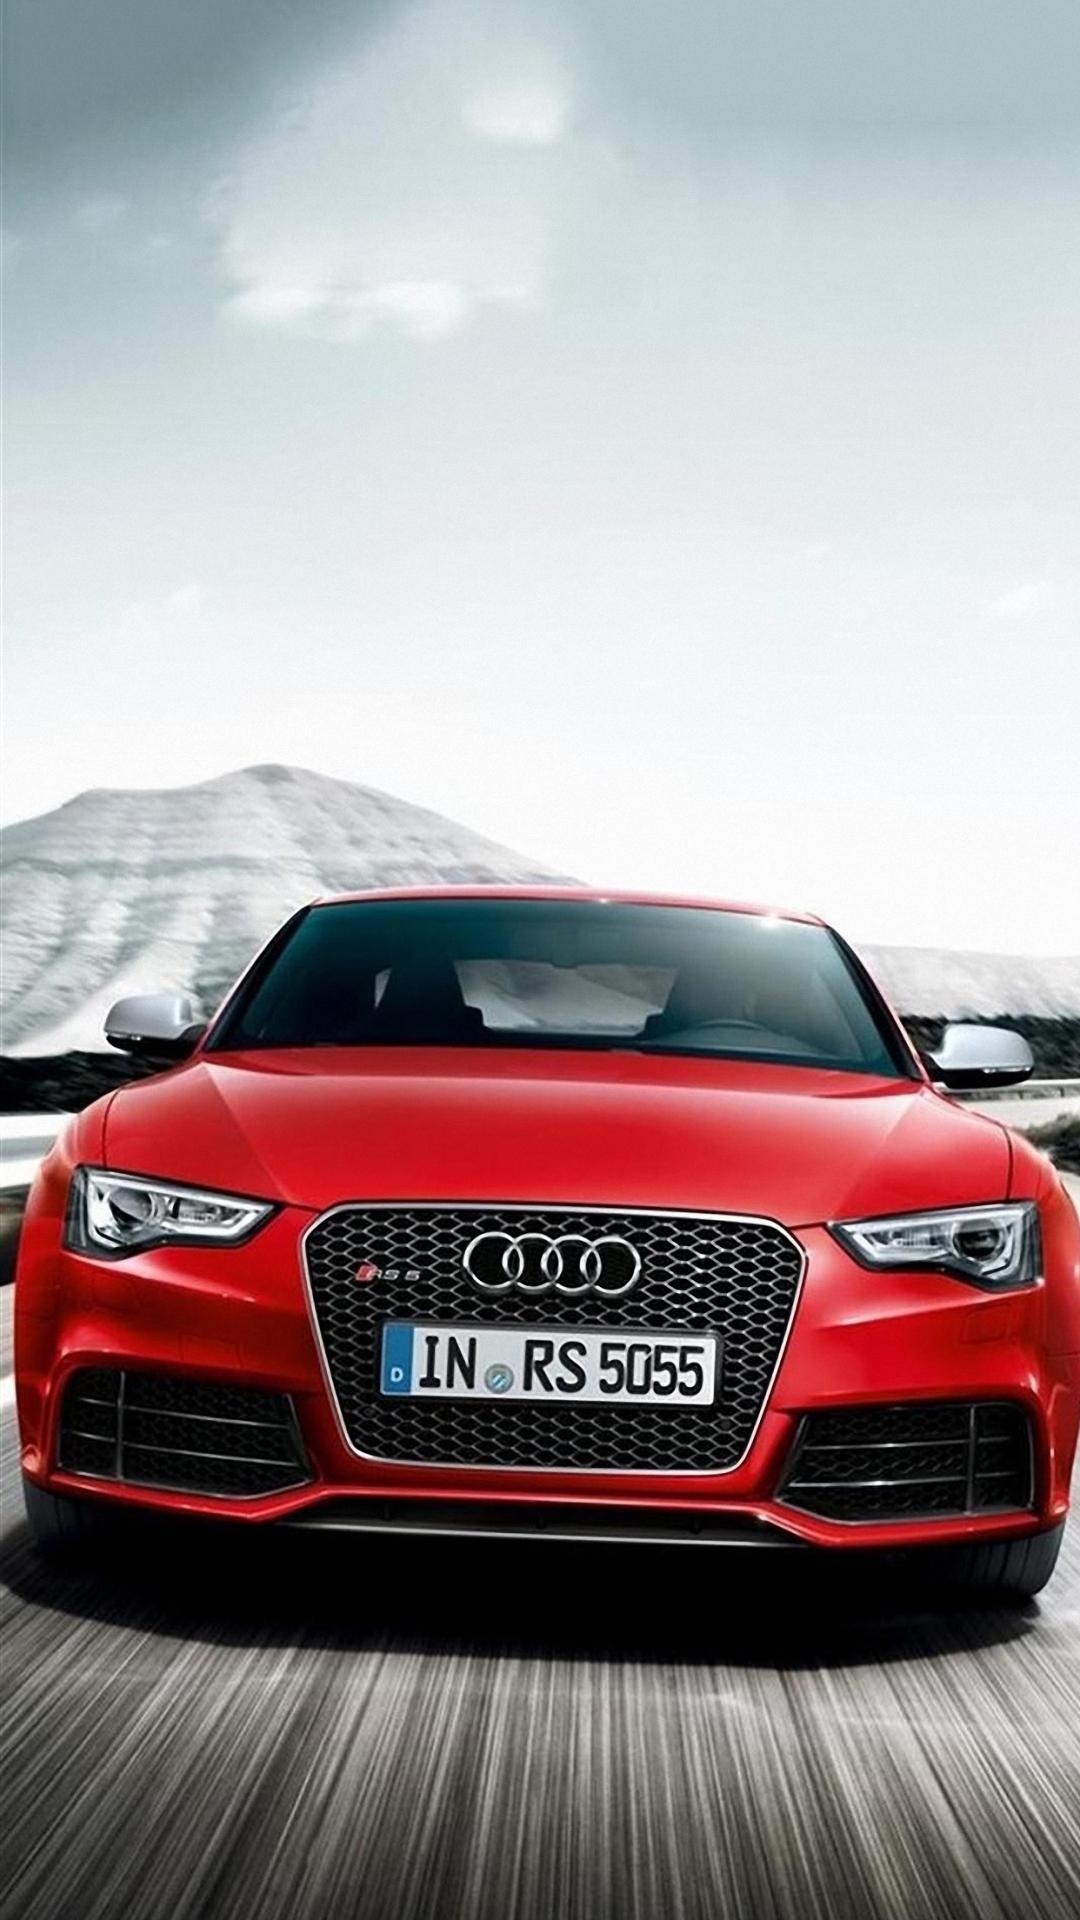 Audi Android Wallpapers Top Free Audi Android Backgrounds Wallpaperaccess